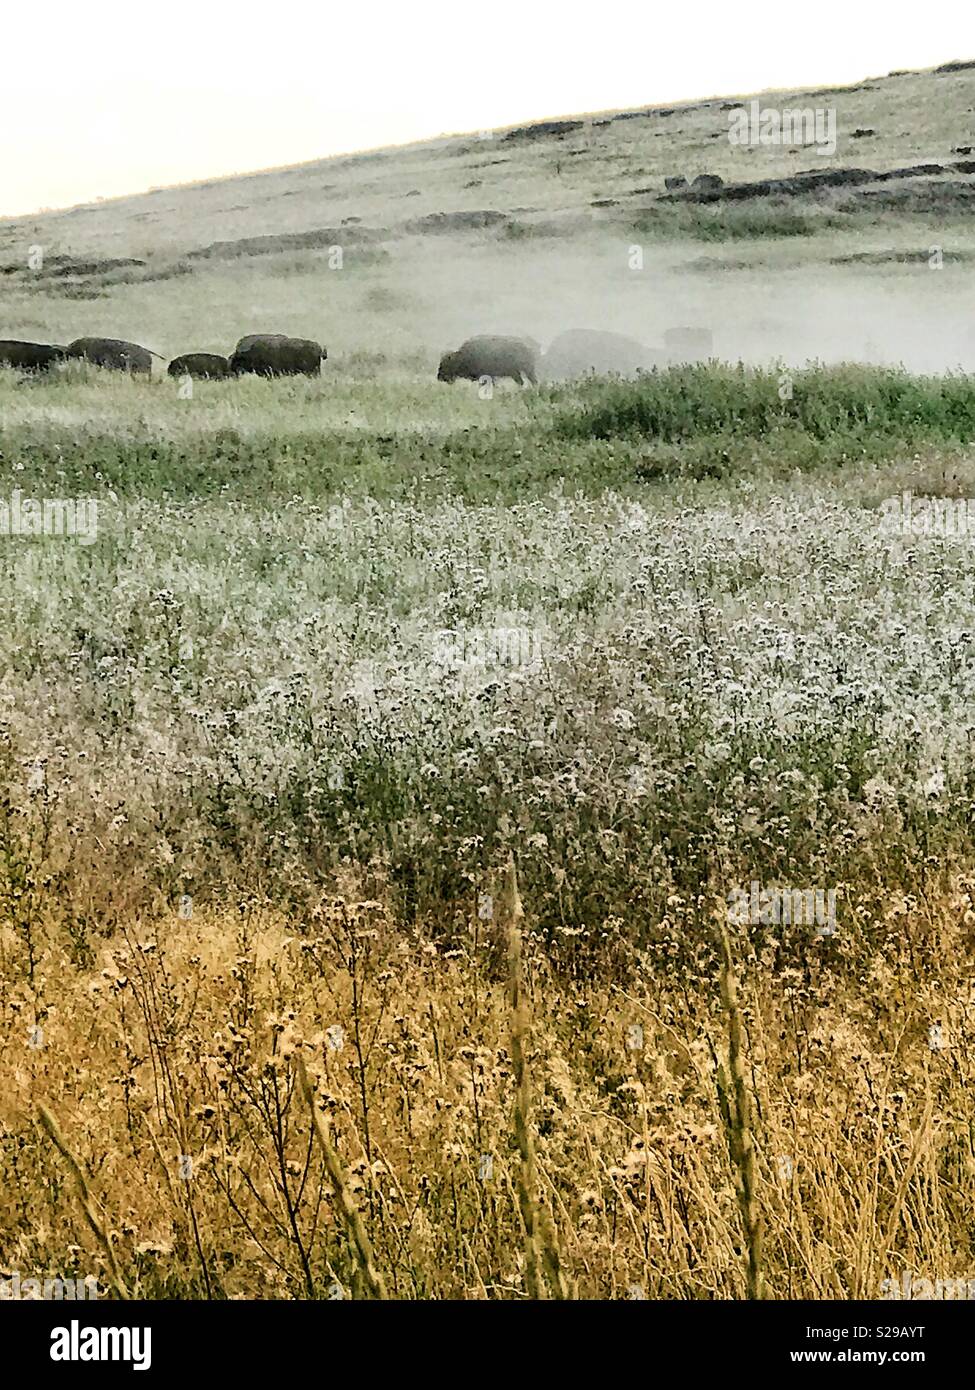 Bison Kicking Up Dust in the National Bison Range, Montana Stock Photo